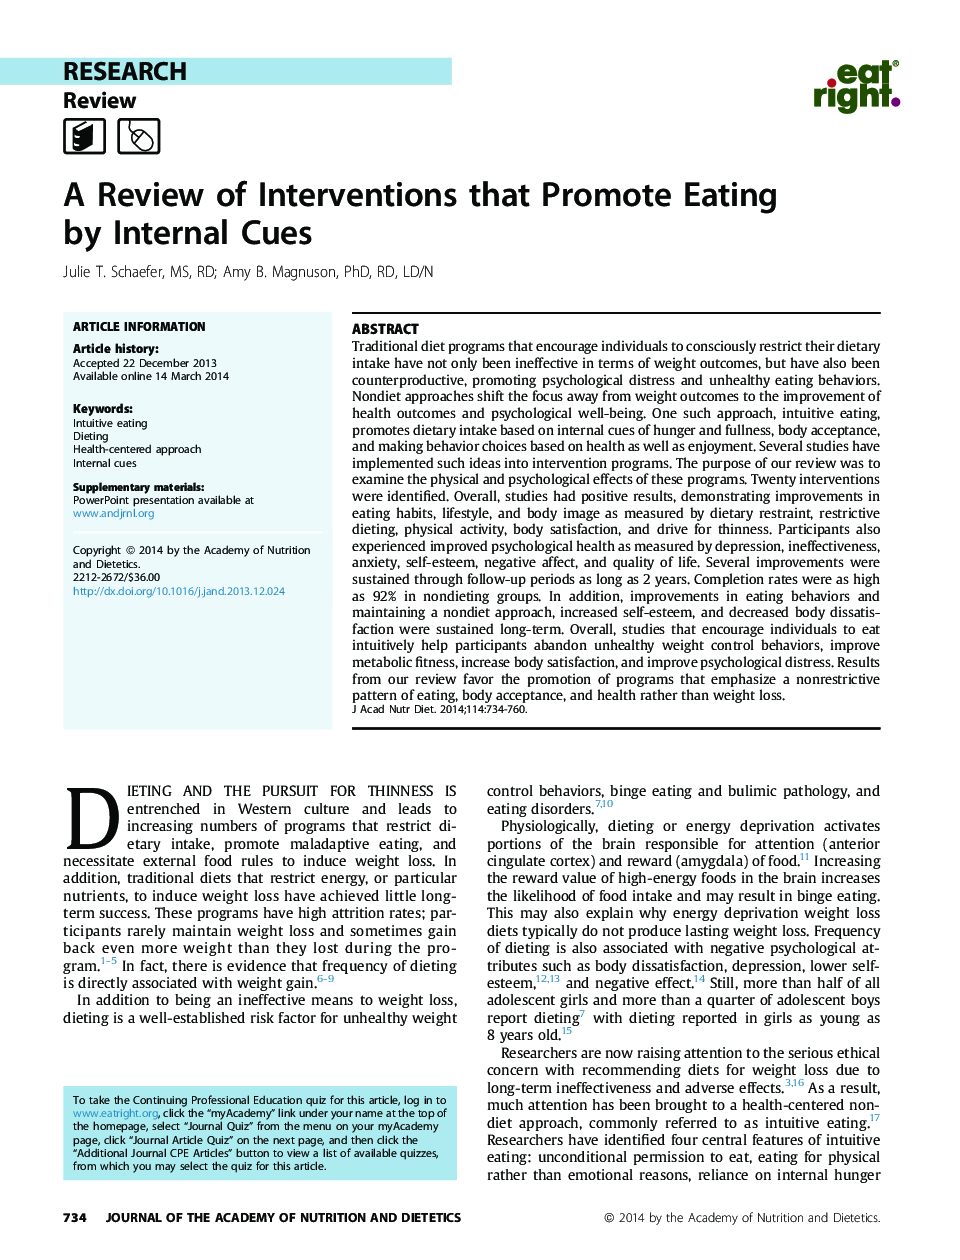 A Review of Interventions that Promote Eating by Internal Cues 